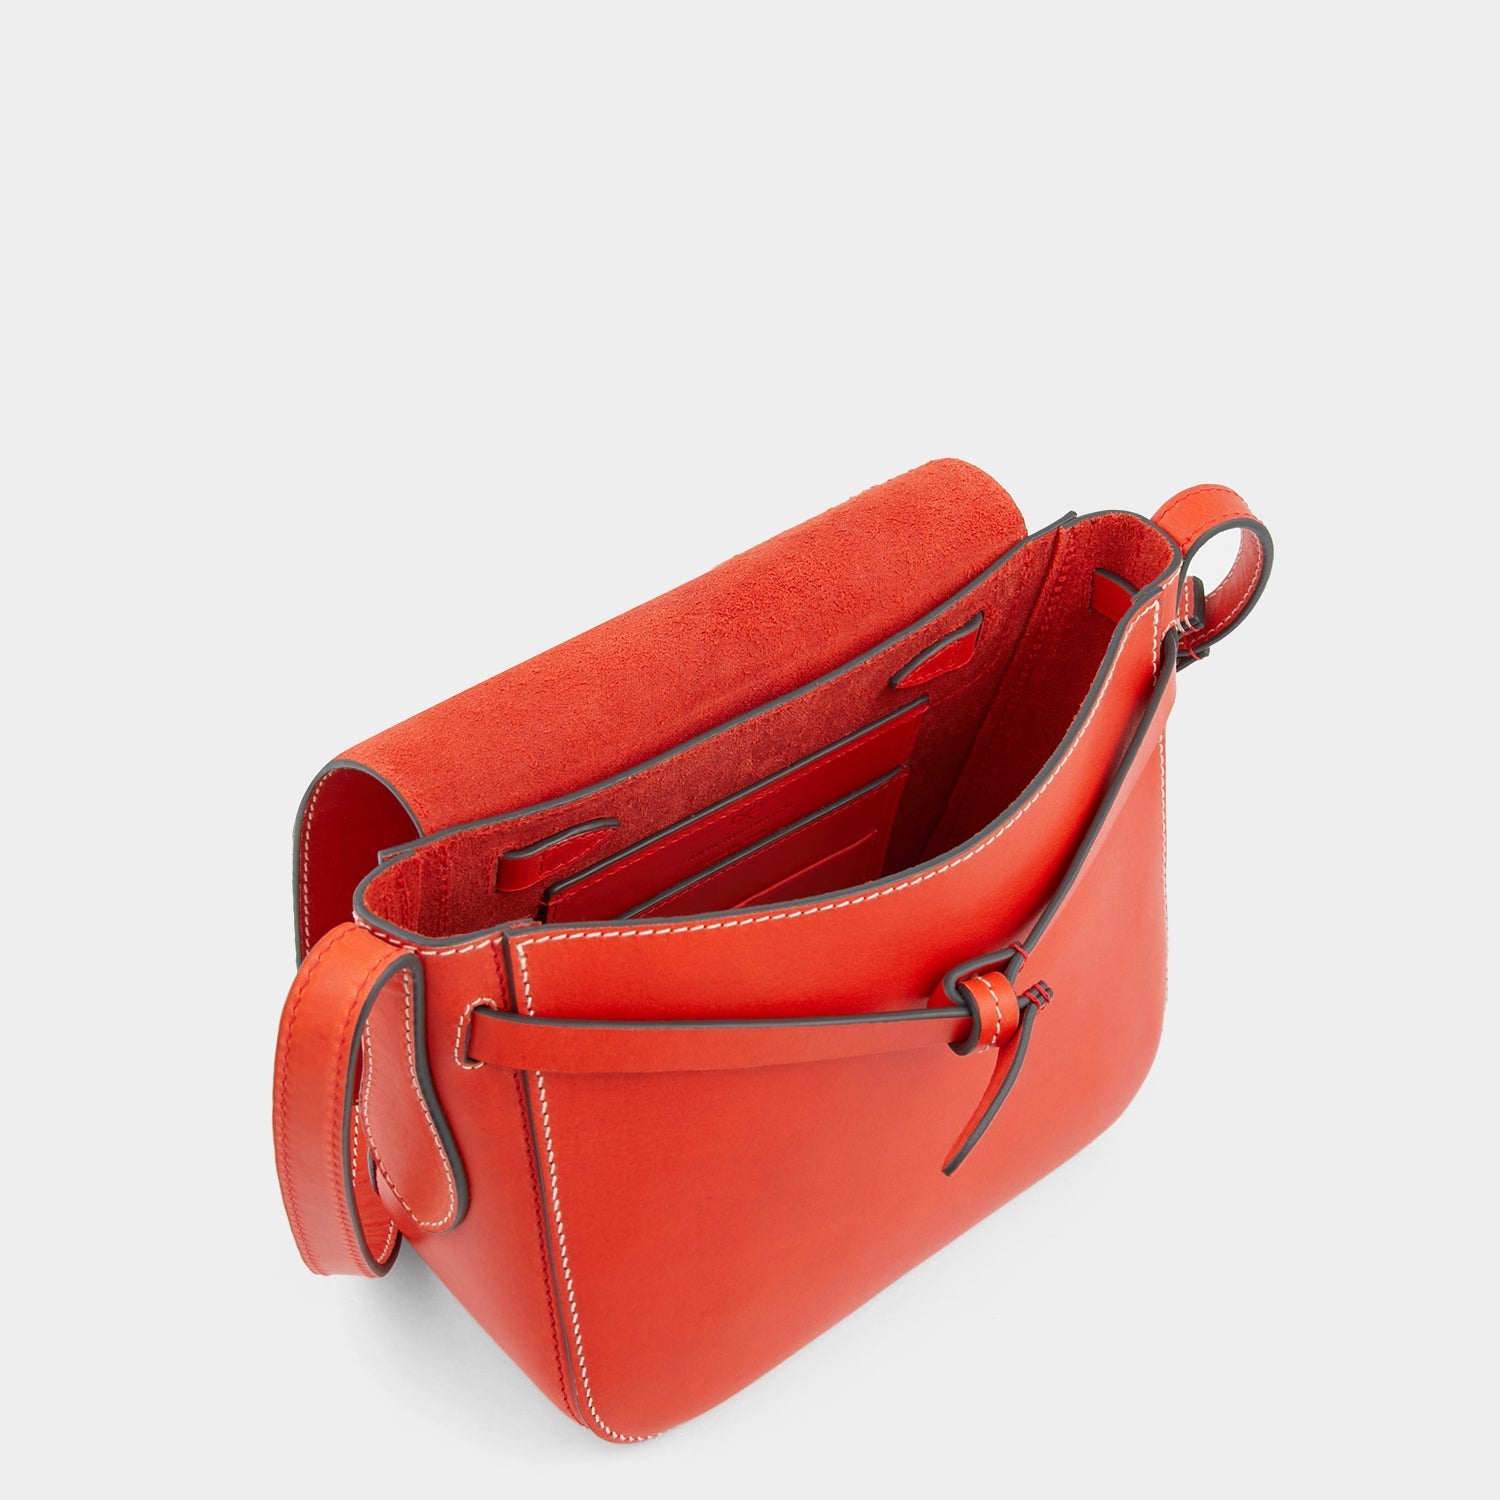 Return to Nature Cross-body -

                  
                    Compostable Leather in Flame Red -
                  

                  Anya Hindmarch US
